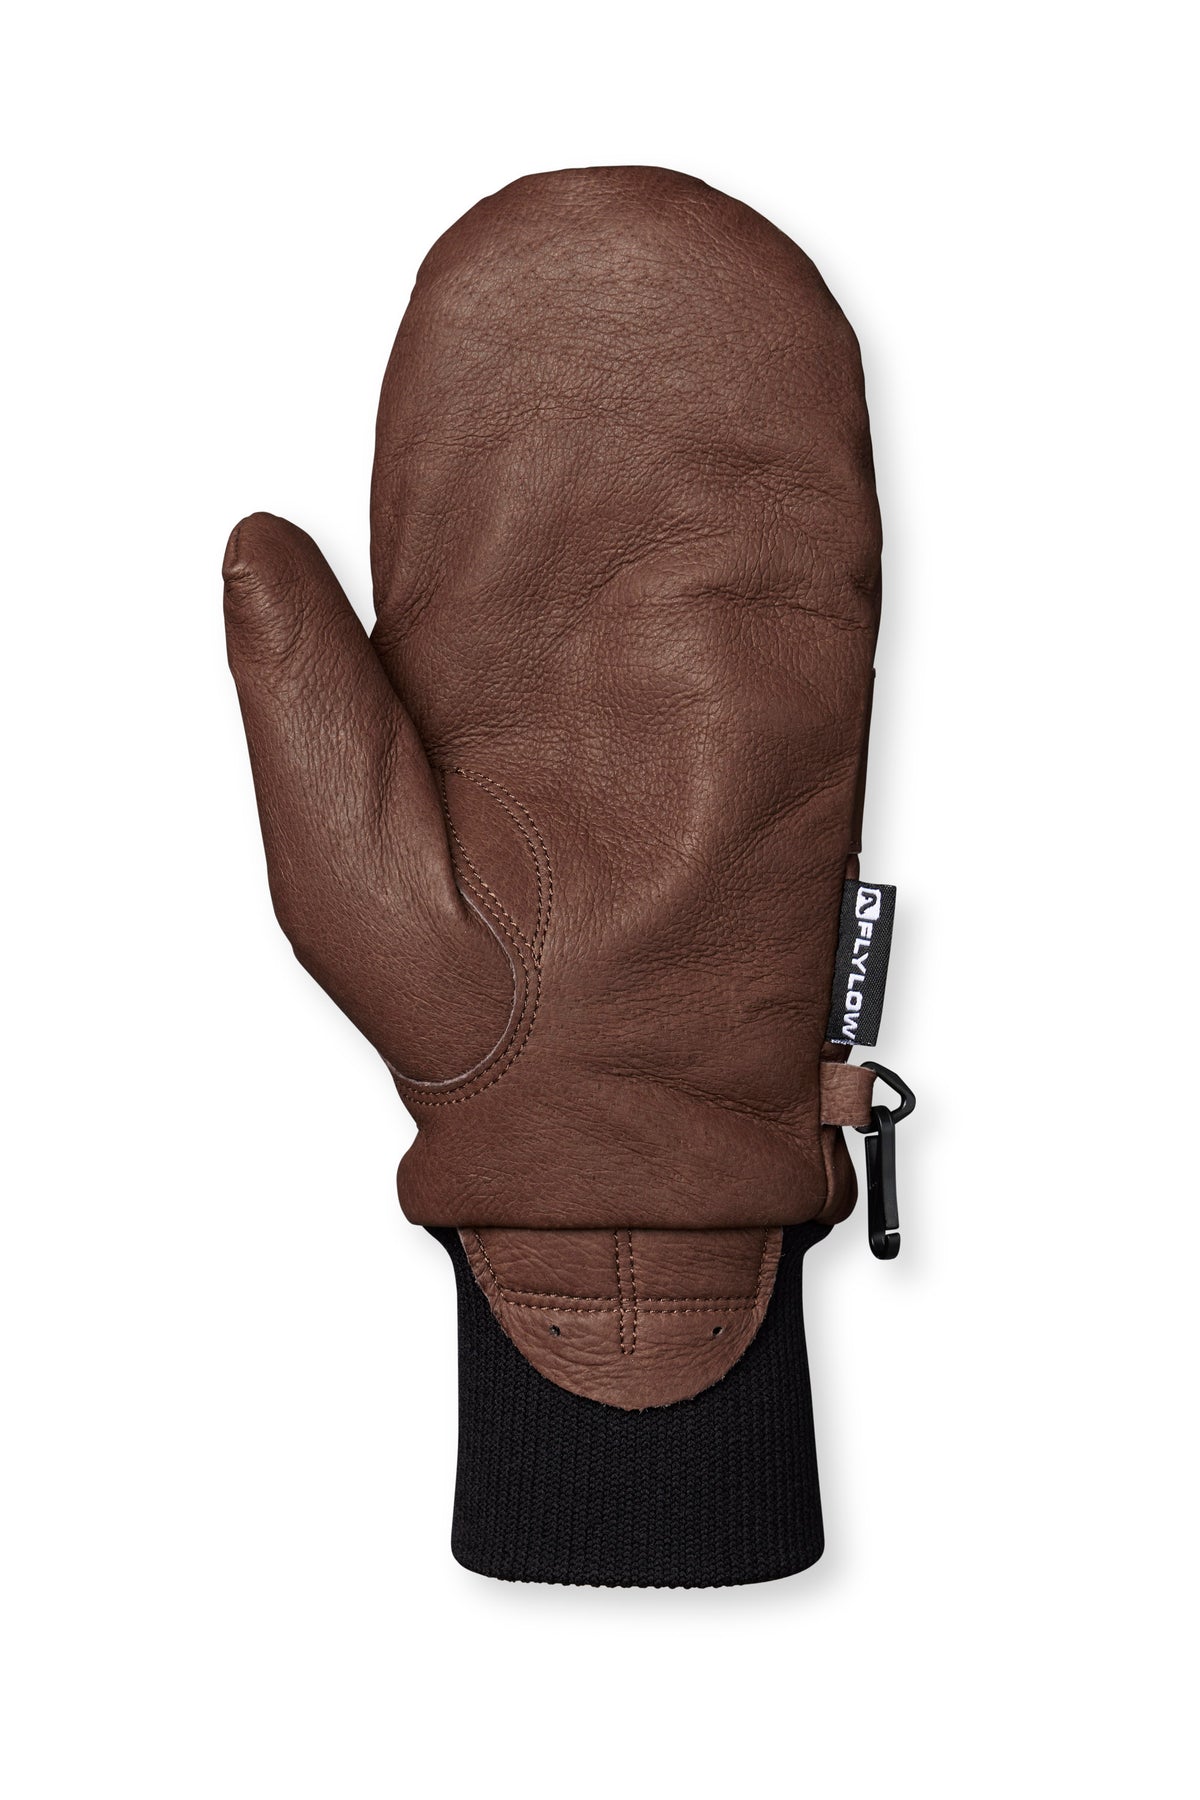 High Temp Leather Oven Gloves